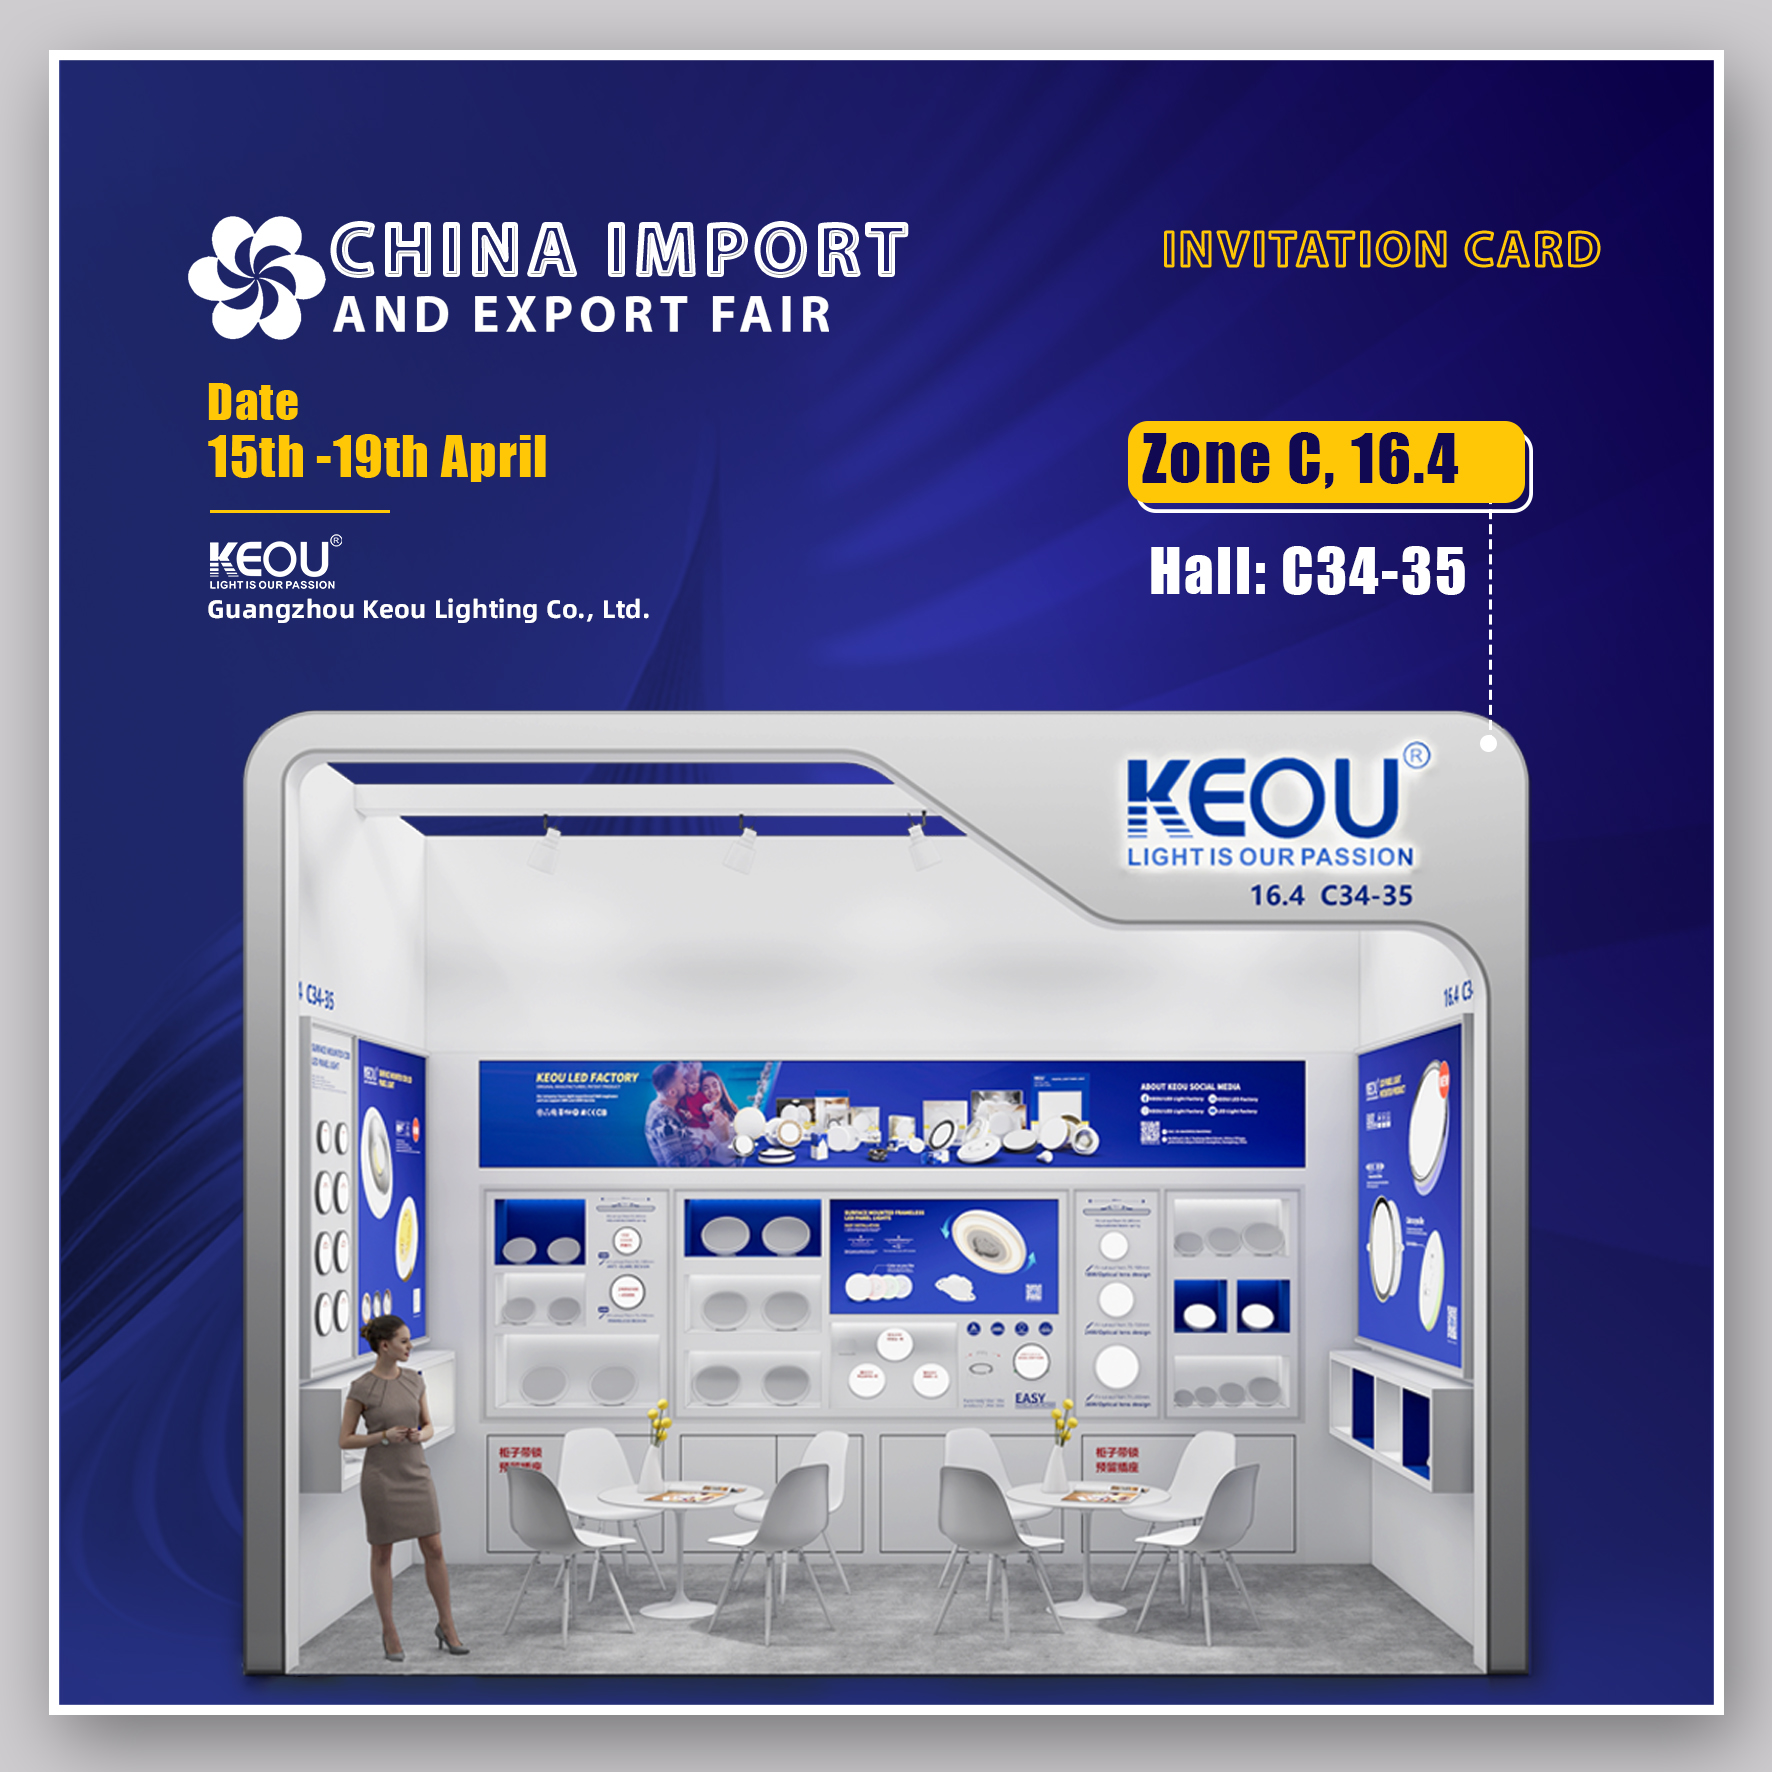 Looking forward to meeting you at the Canton Fair